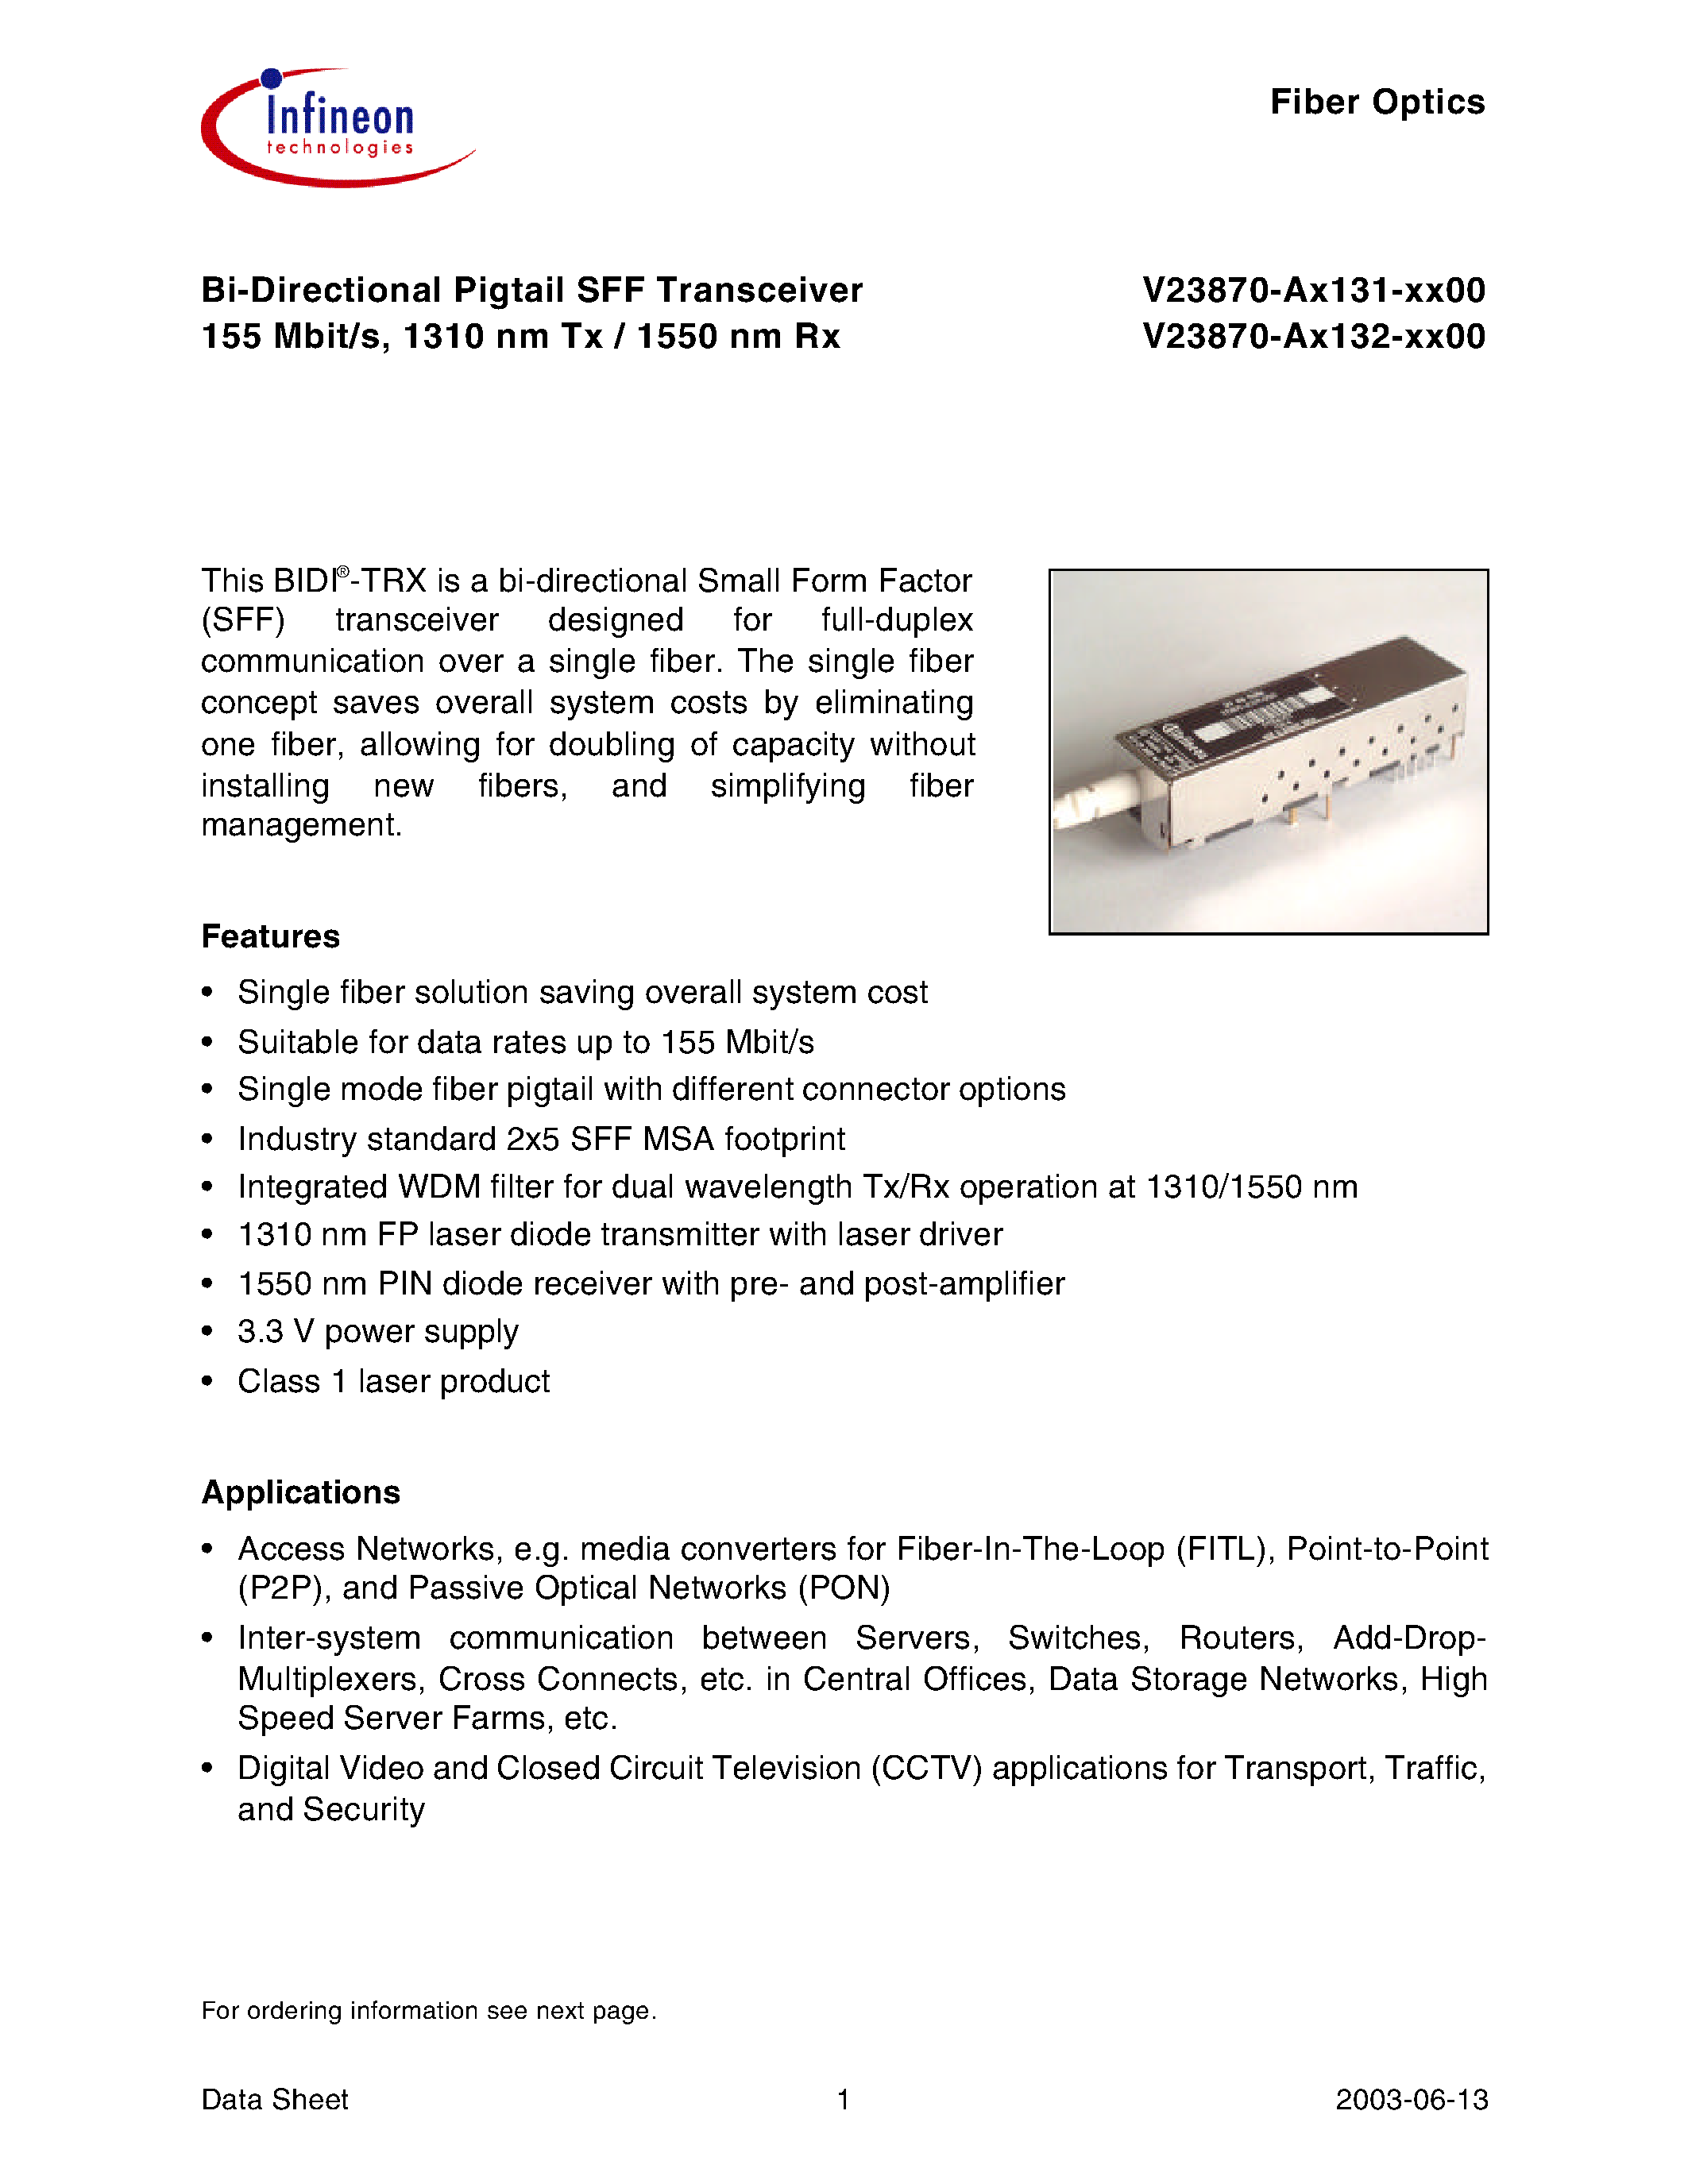 Datasheet V23870-A1131-F200 - Bi-Directional Pigtail SFF Transceiver 155 Mbit/s/ 1310 nm Tx / 1550 nm Rx page 1